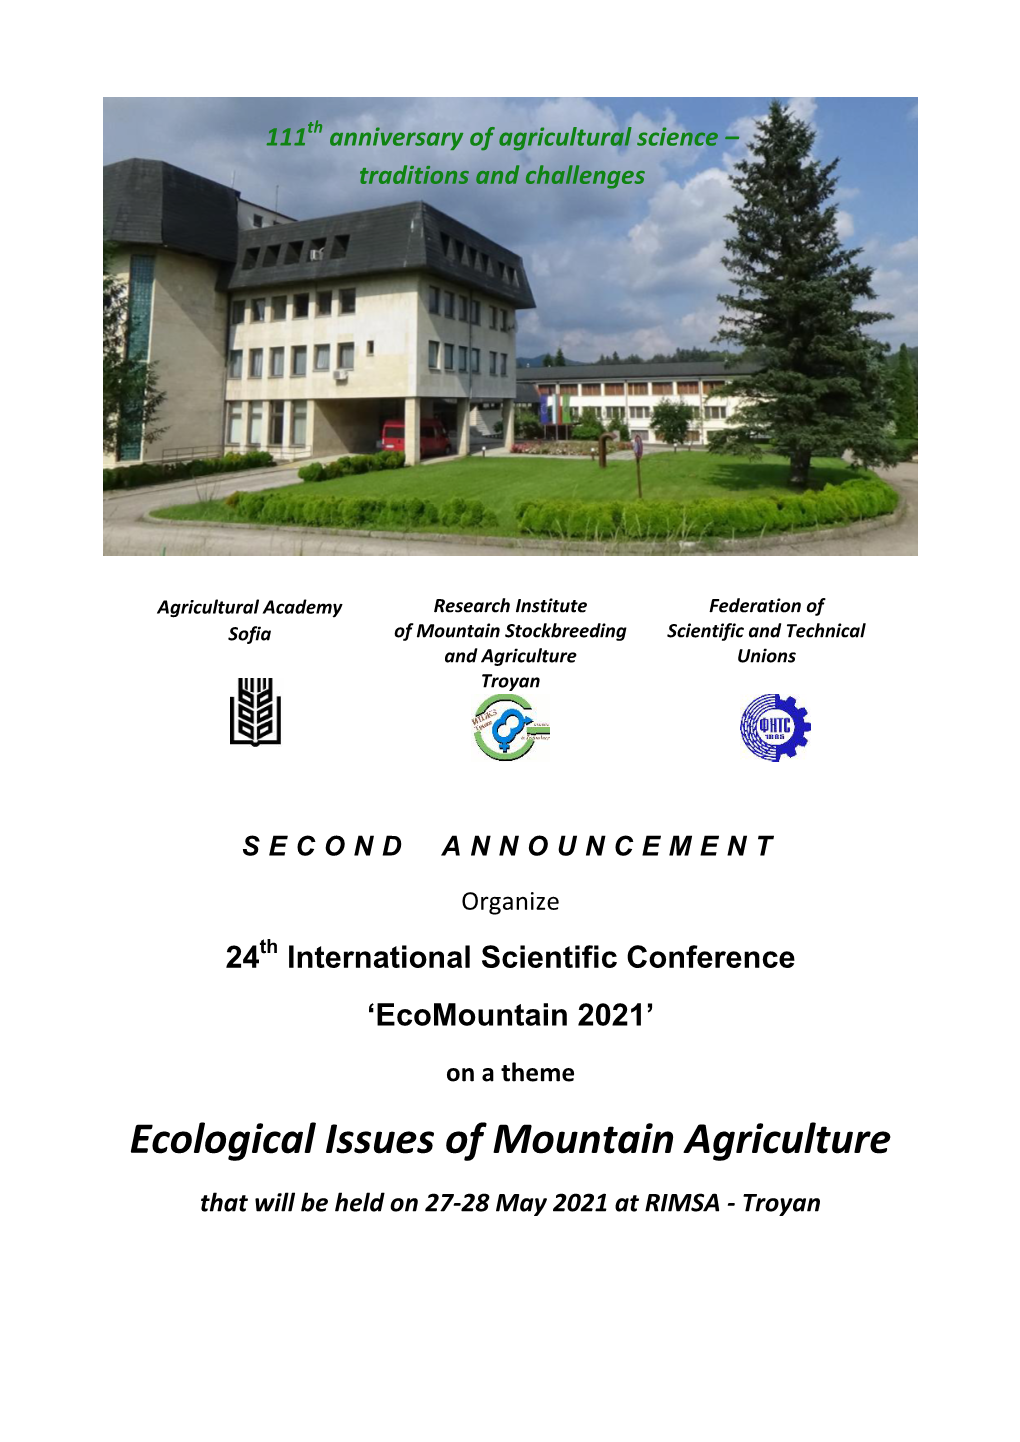 Ecological Issues of Mountain Agriculture